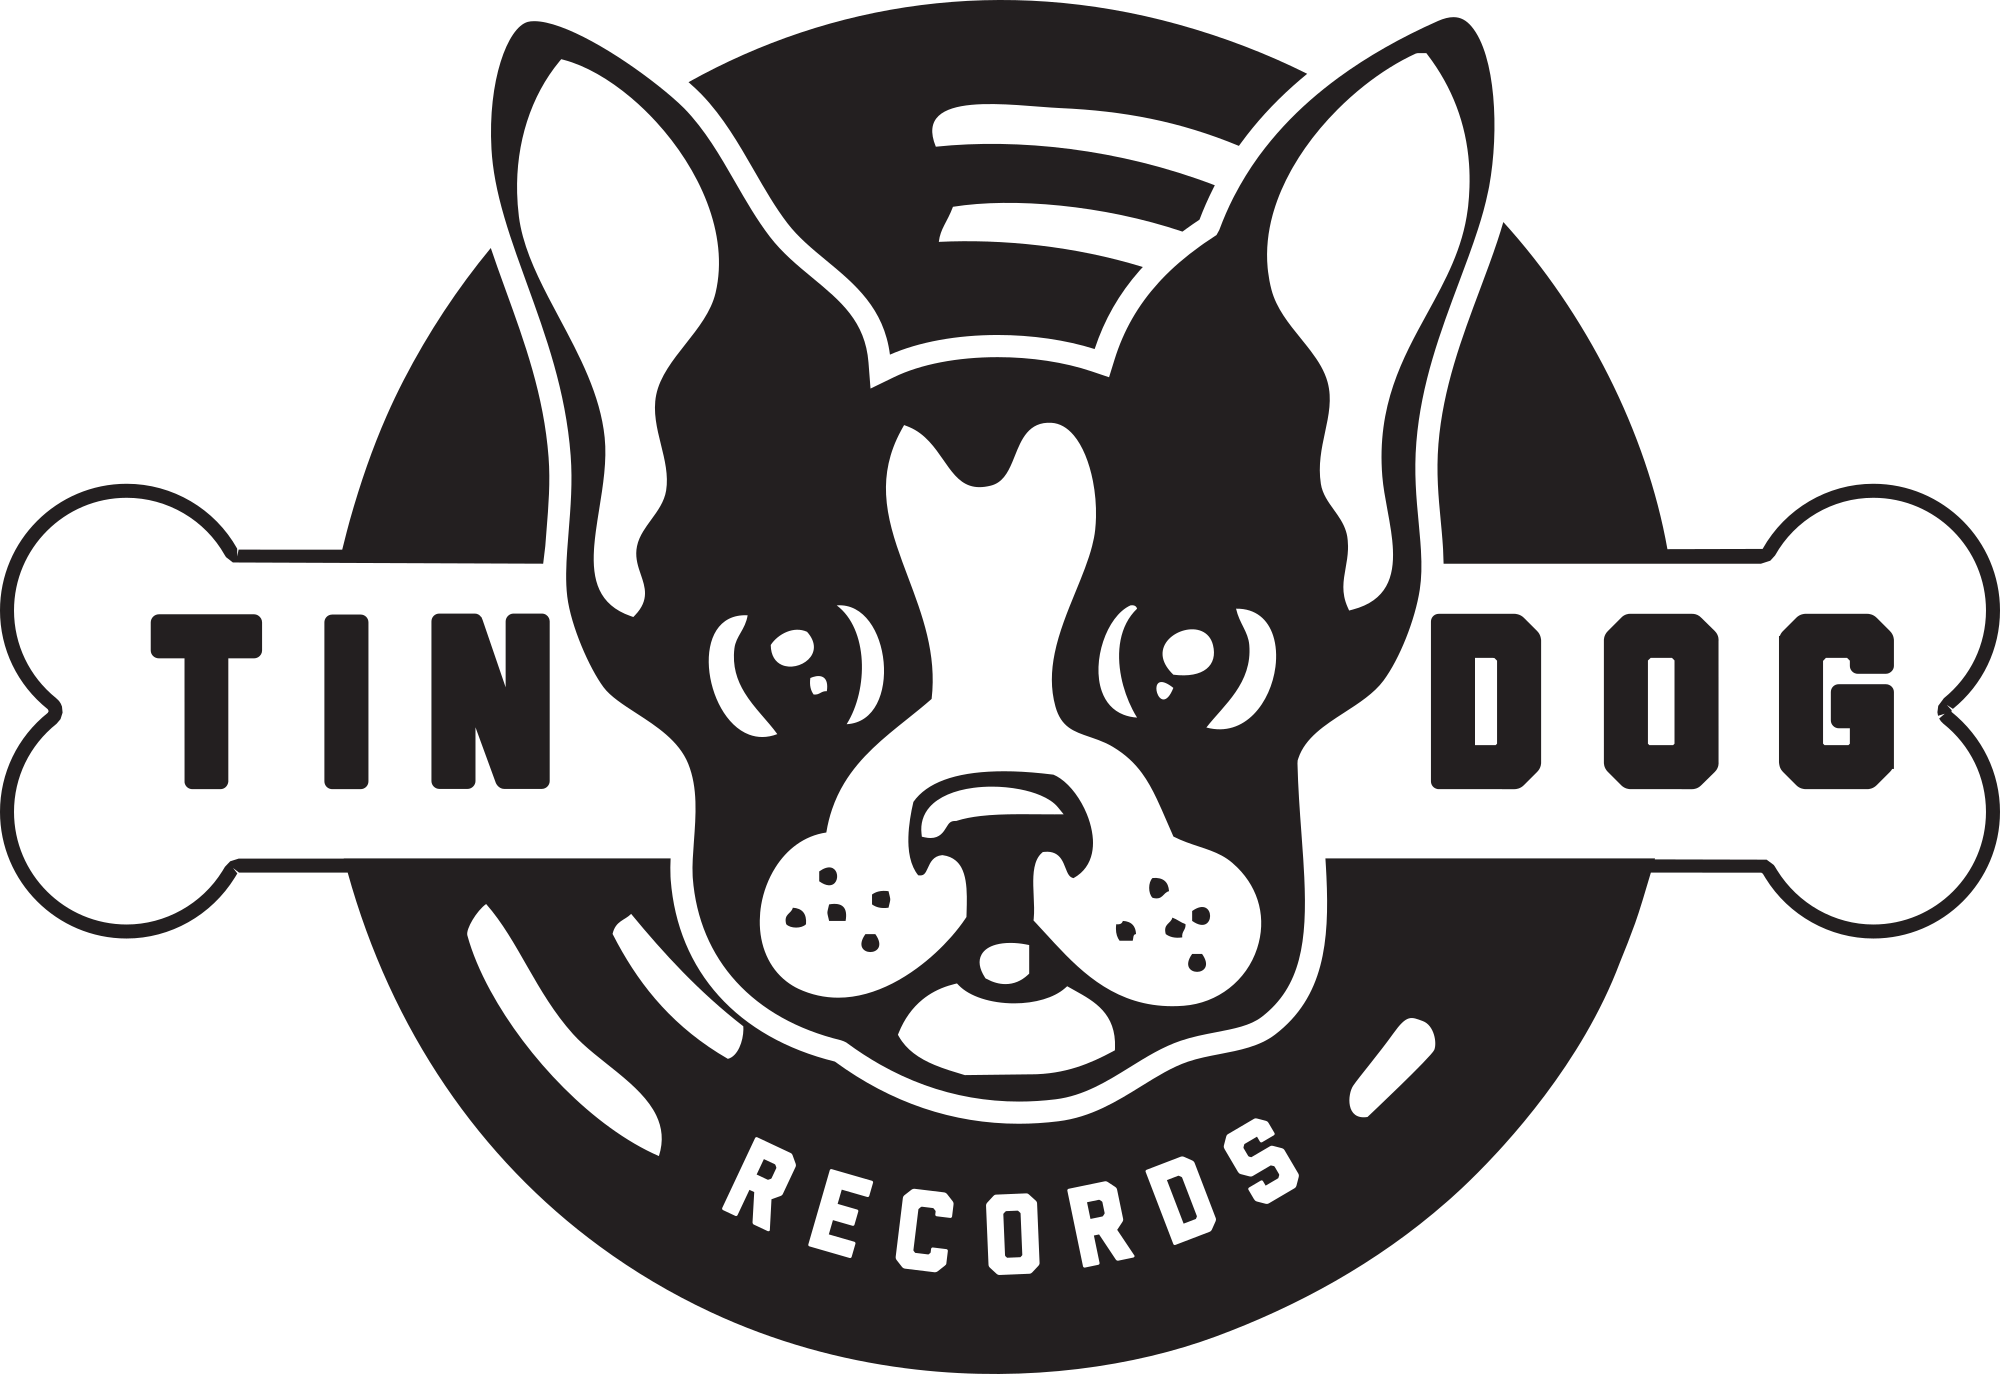 Record Store,downtown Tuesday Gt Home,university Of - Art Print: Pop Ink - Csa Images' Boston Terrier Portrait, (2000x1374)